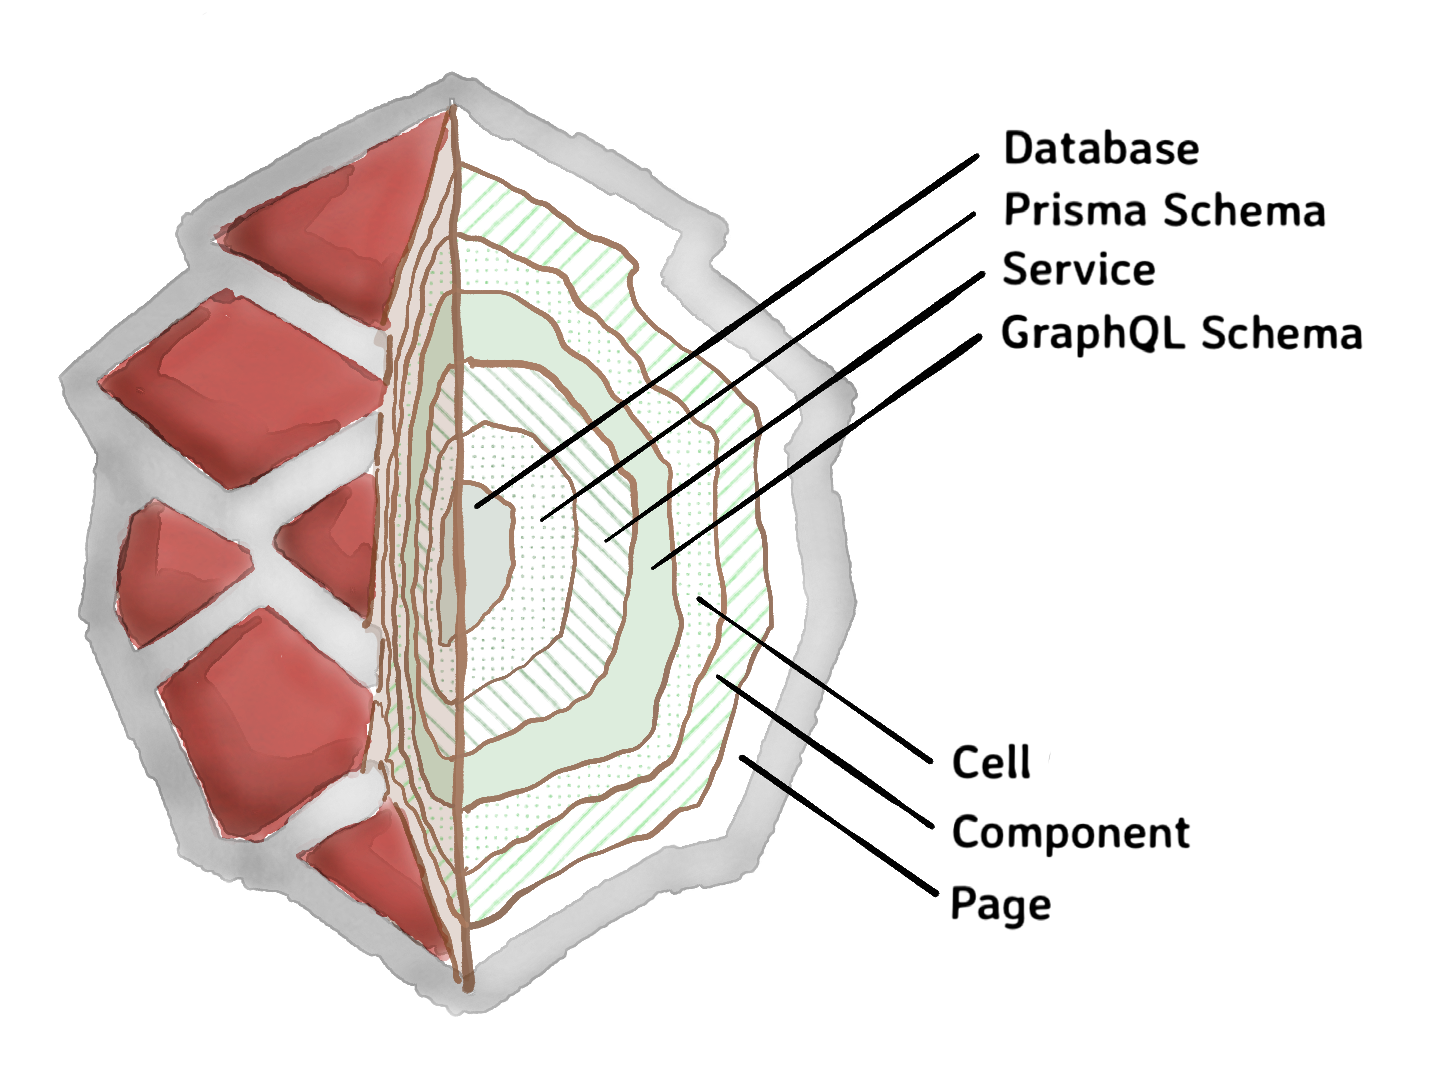 Cross-section of a Redwood app, in the style of a 3d globe with a cutout to show the layers inside.